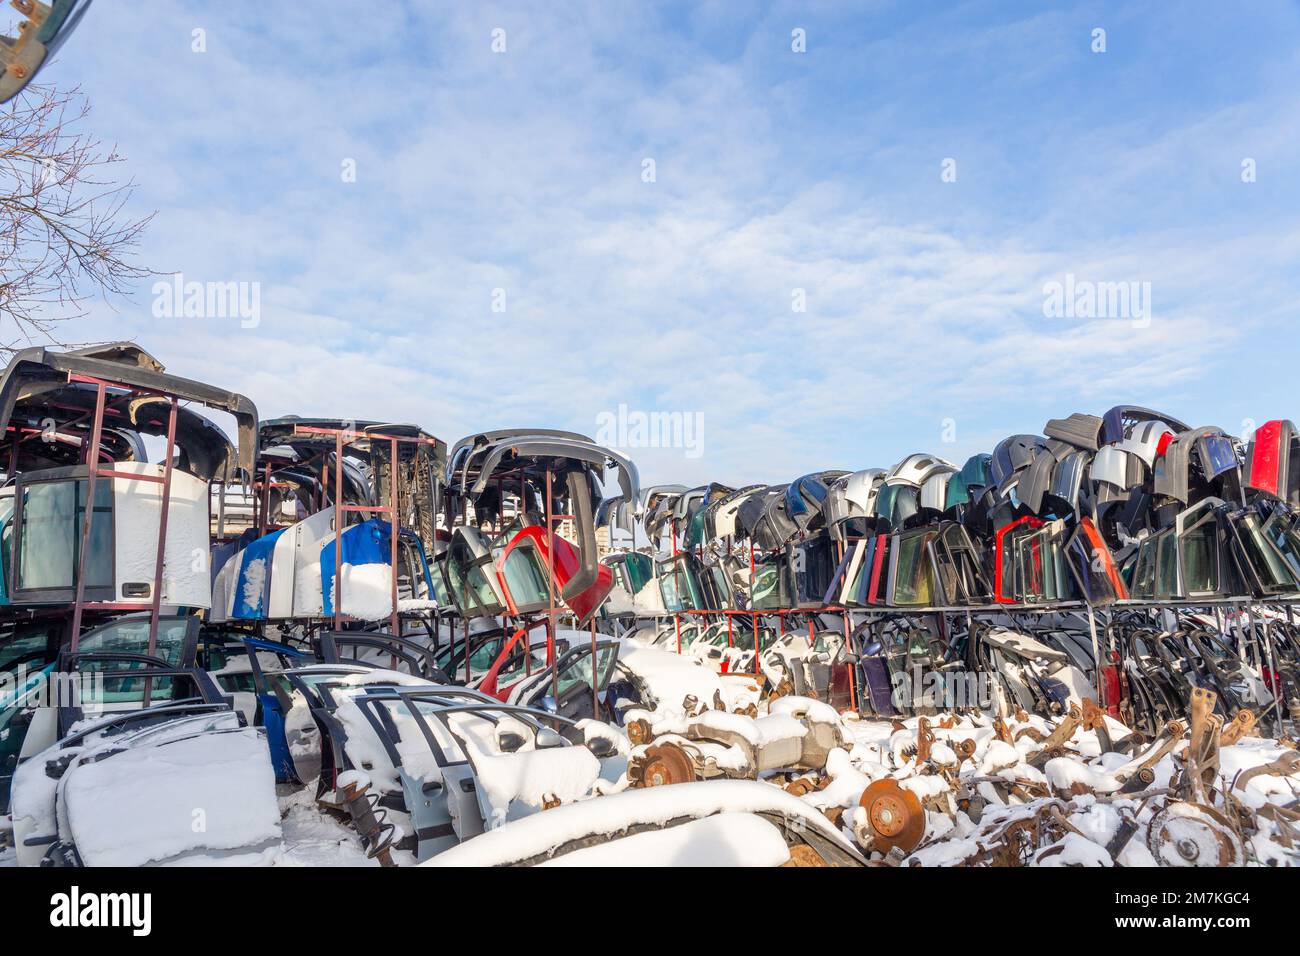 Disassembled cars on a car dump are on sale for spare parts. A stack of car suspensions, doors and bumpers. Trade in used spare parts is a common busi Stock Photo